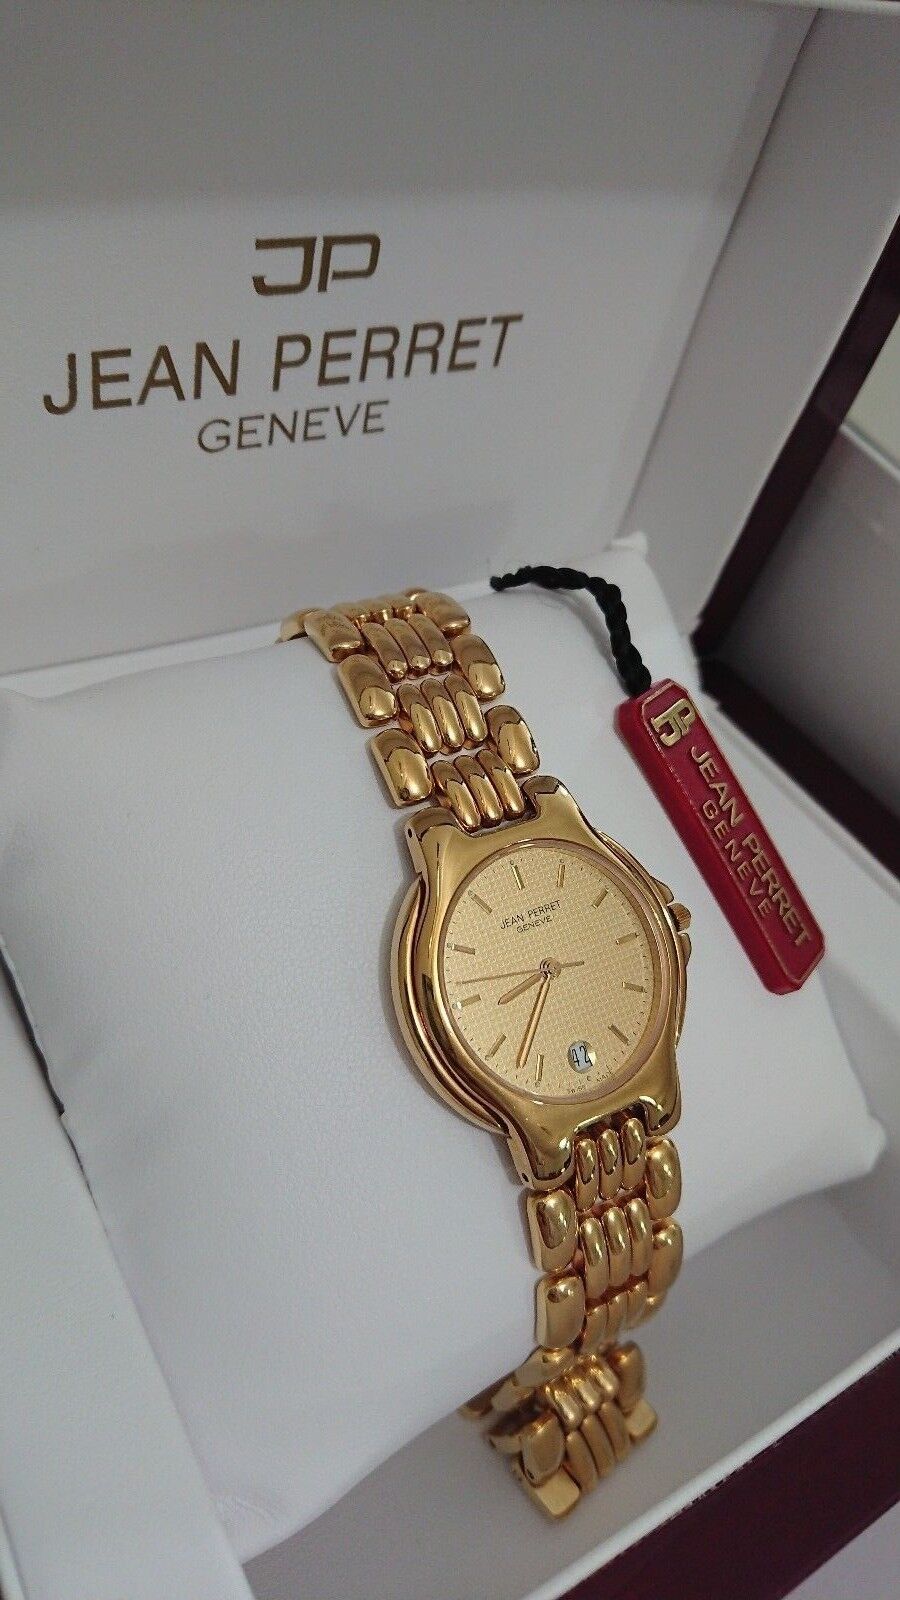 JEAN PERRET *GENEVE* Watch Swiss Made for men or ladies (case size 33mm)  NEW 03